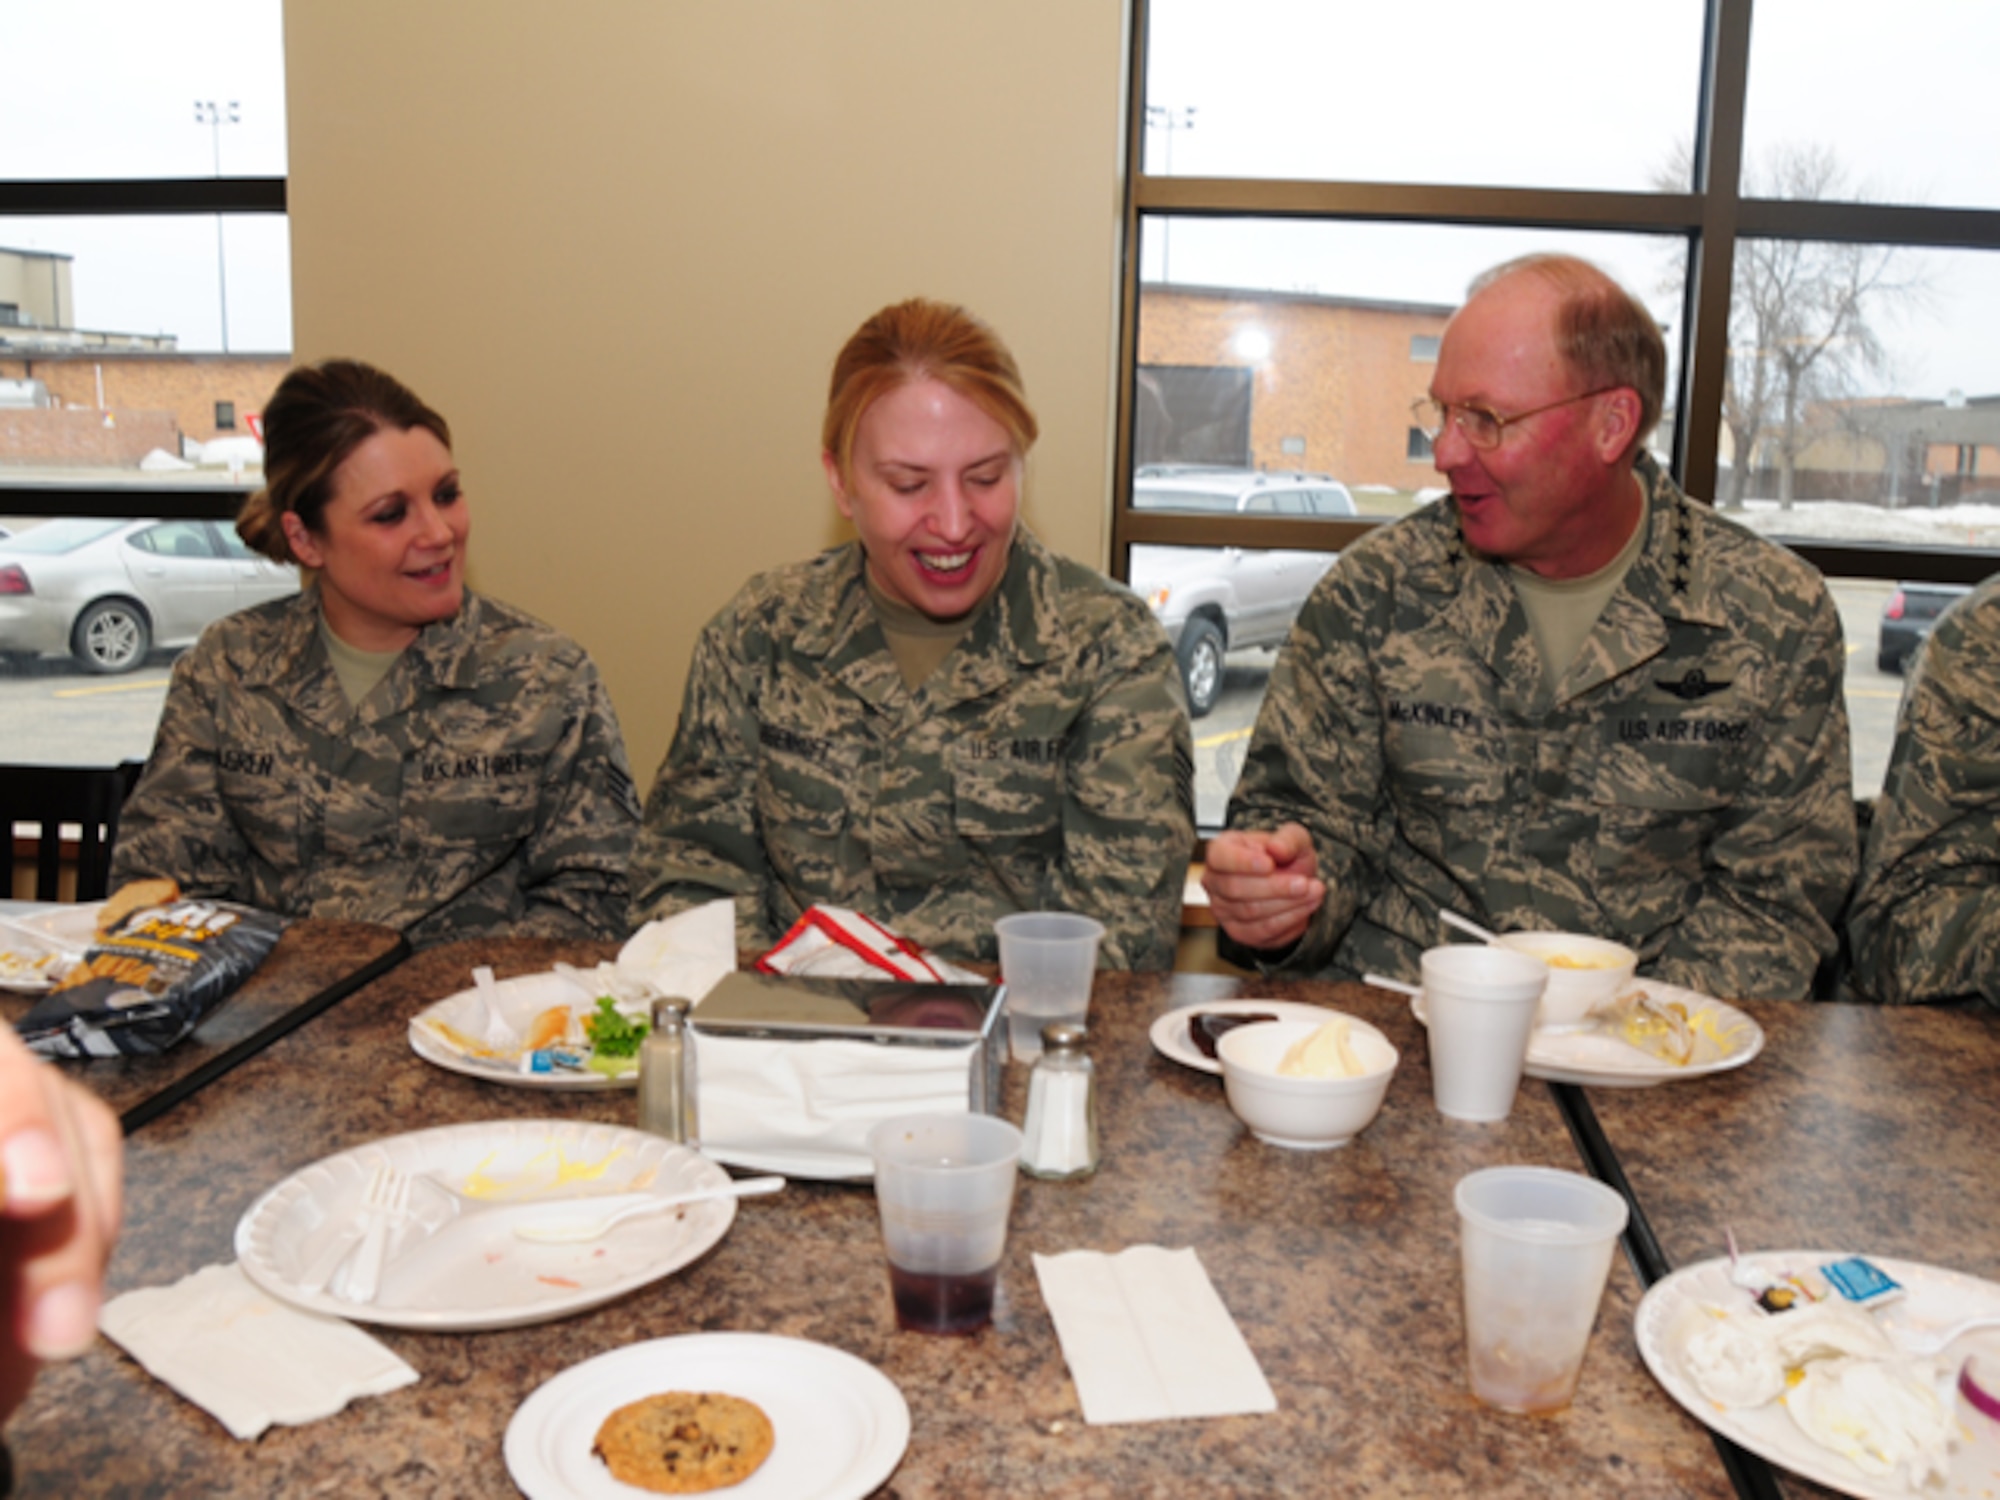 Gen. Craig R. McKinley, chief of the National Guard Bureau, laughs with Staff Sgt. Kristi Krabbenhoft, 119th Wing, while eating lunch at the 119th Wing on March 22.  McKinley ate with more than a dozen North Dakota Guardsmen and took time to talk about the ongoing flood operations taking place in the area.  